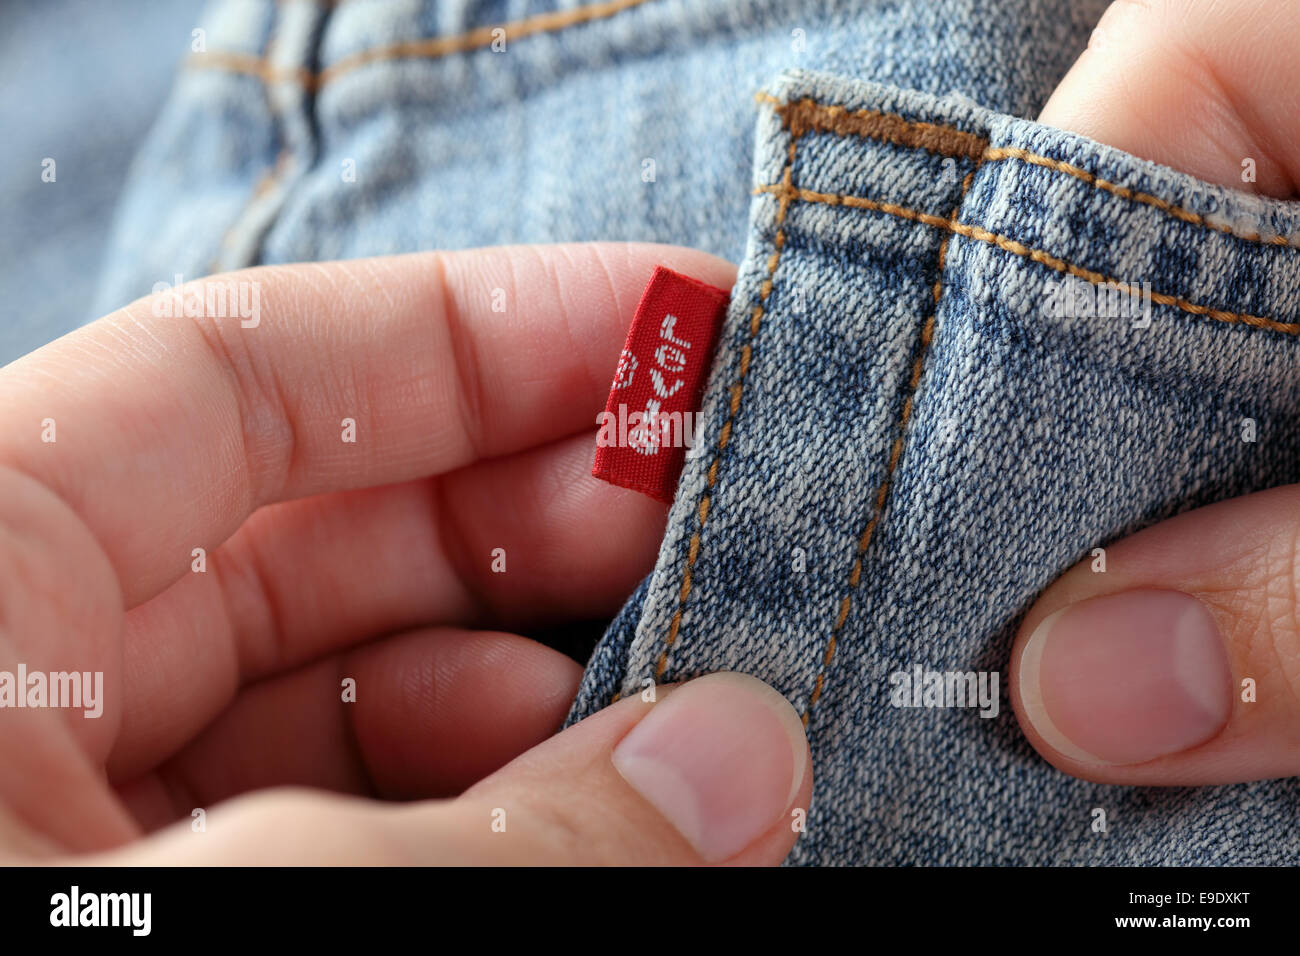 Tambov, Russian Federation - October 21, 2012 Woman's hands holding red label logo of a pair Levi's Jeans. Studio shot. Stock Photo